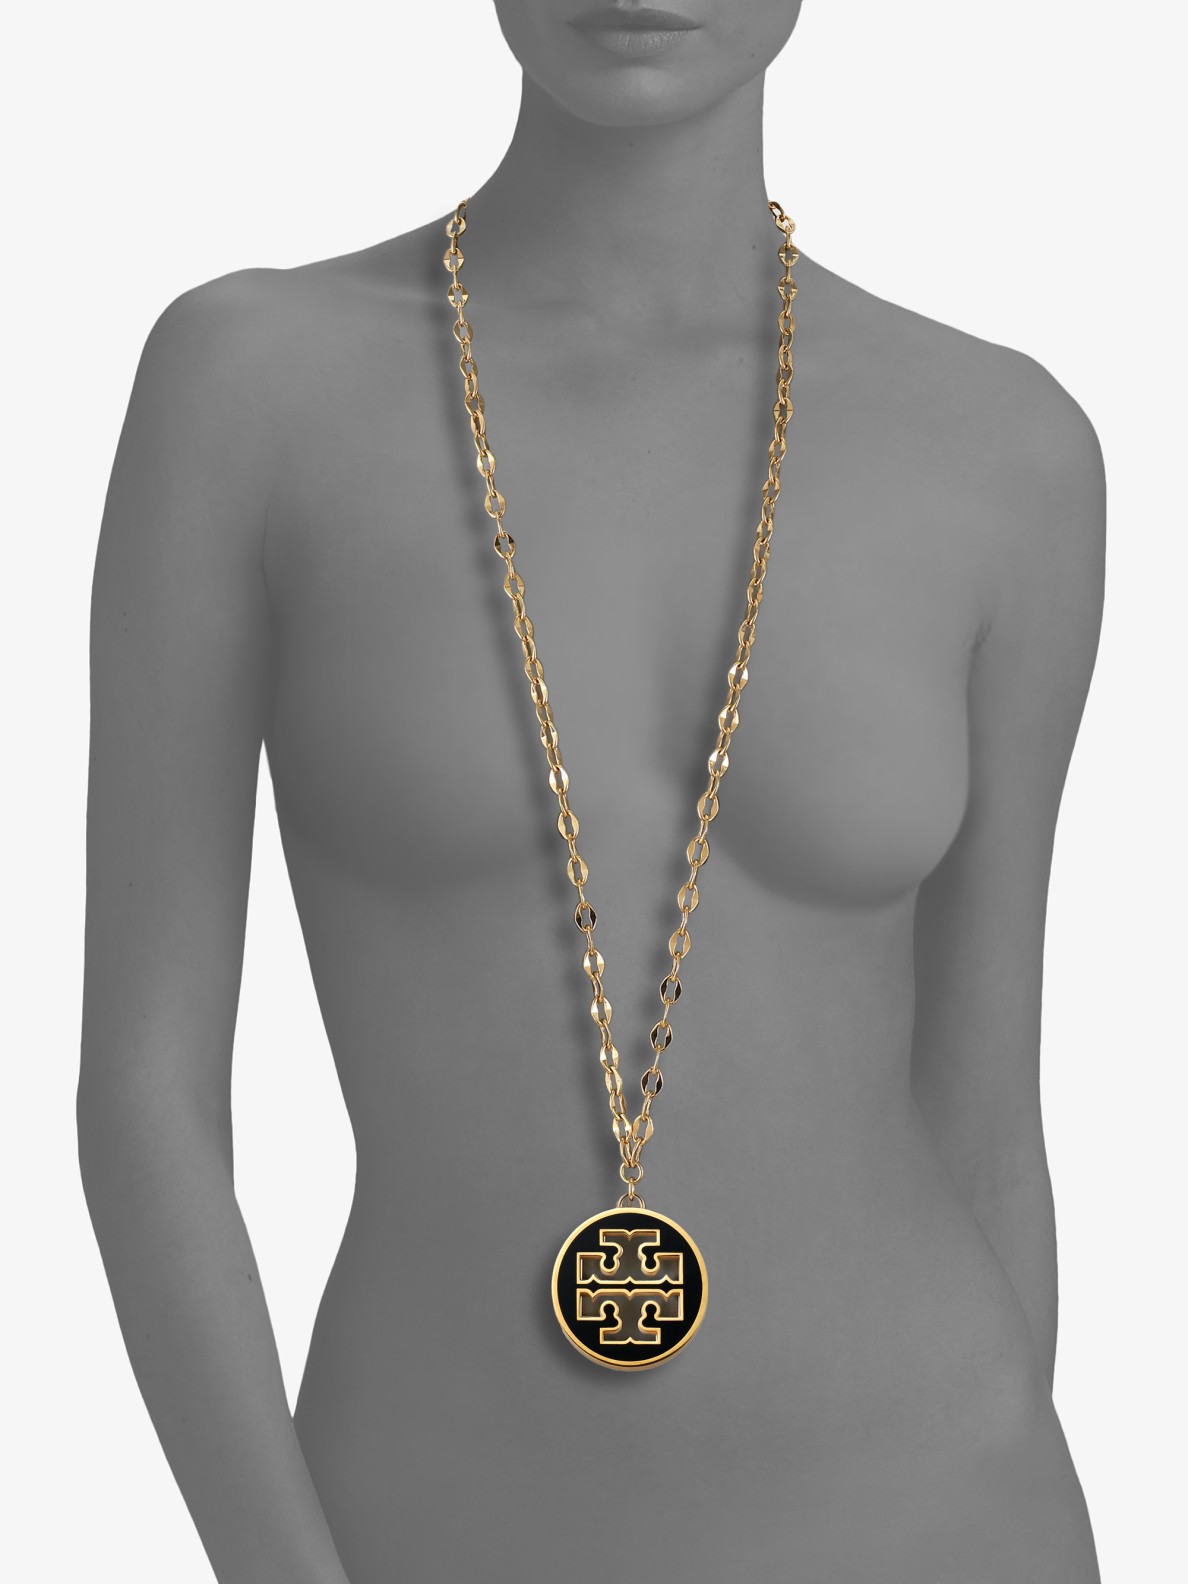 Tory Burch Logo Pendant Necklace in Black | Lyst